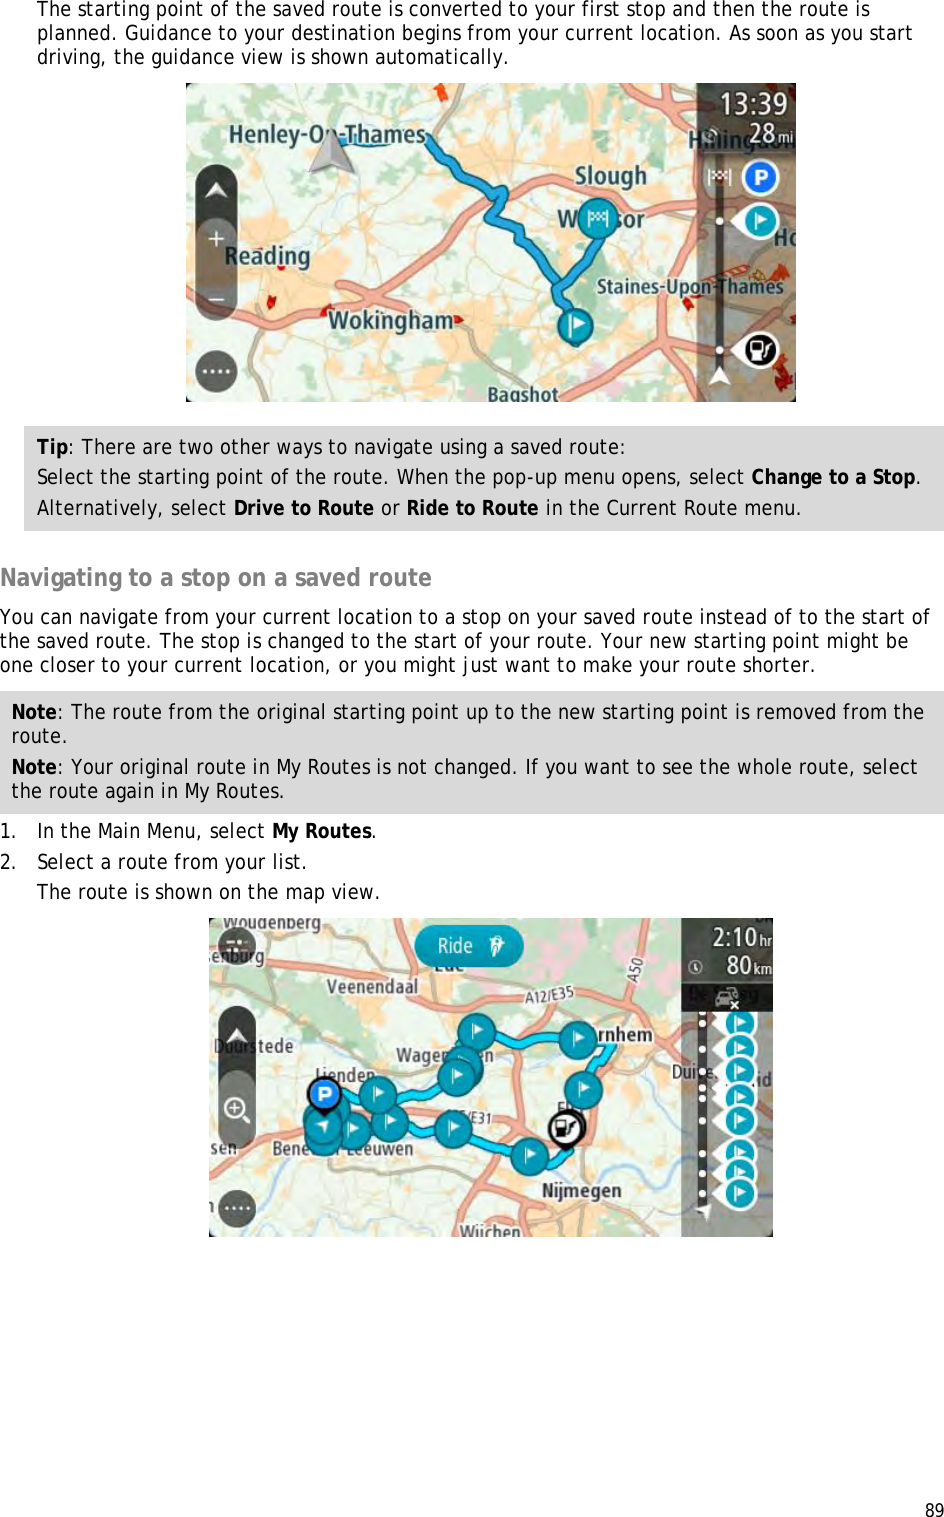  89  The starting point of the saved route is converted to your first stop and then the route is planned. Guidance to your destination begins from your current location. As soon as you start driving, the guidance view is shown automatically.  Tip: There are two other ways to navigate using a saved route: Select the starting point of the route. When the pop-up menu opens, select Change to a Stop. Alternatively, select Drive to Route or Ride to Route in the Current Route menu.  Navigating to a stop on a saved route You can navigate from your current location to a stop on your saved route instead of to the start of the saved route. The stop is changed to the start of your route. Your new starting point might be one closer to your current location, or you might just want to make your route shorter. Note: The route from the original starting point up to the new starting point is removed from the route.  Note: Your original route in My Routes is not changed. If you want to see the whole route, select the route again in My Routes. 1. In the Main Menu, select My Routes. 2. Select a route from your list. The route is shown on the map view.  